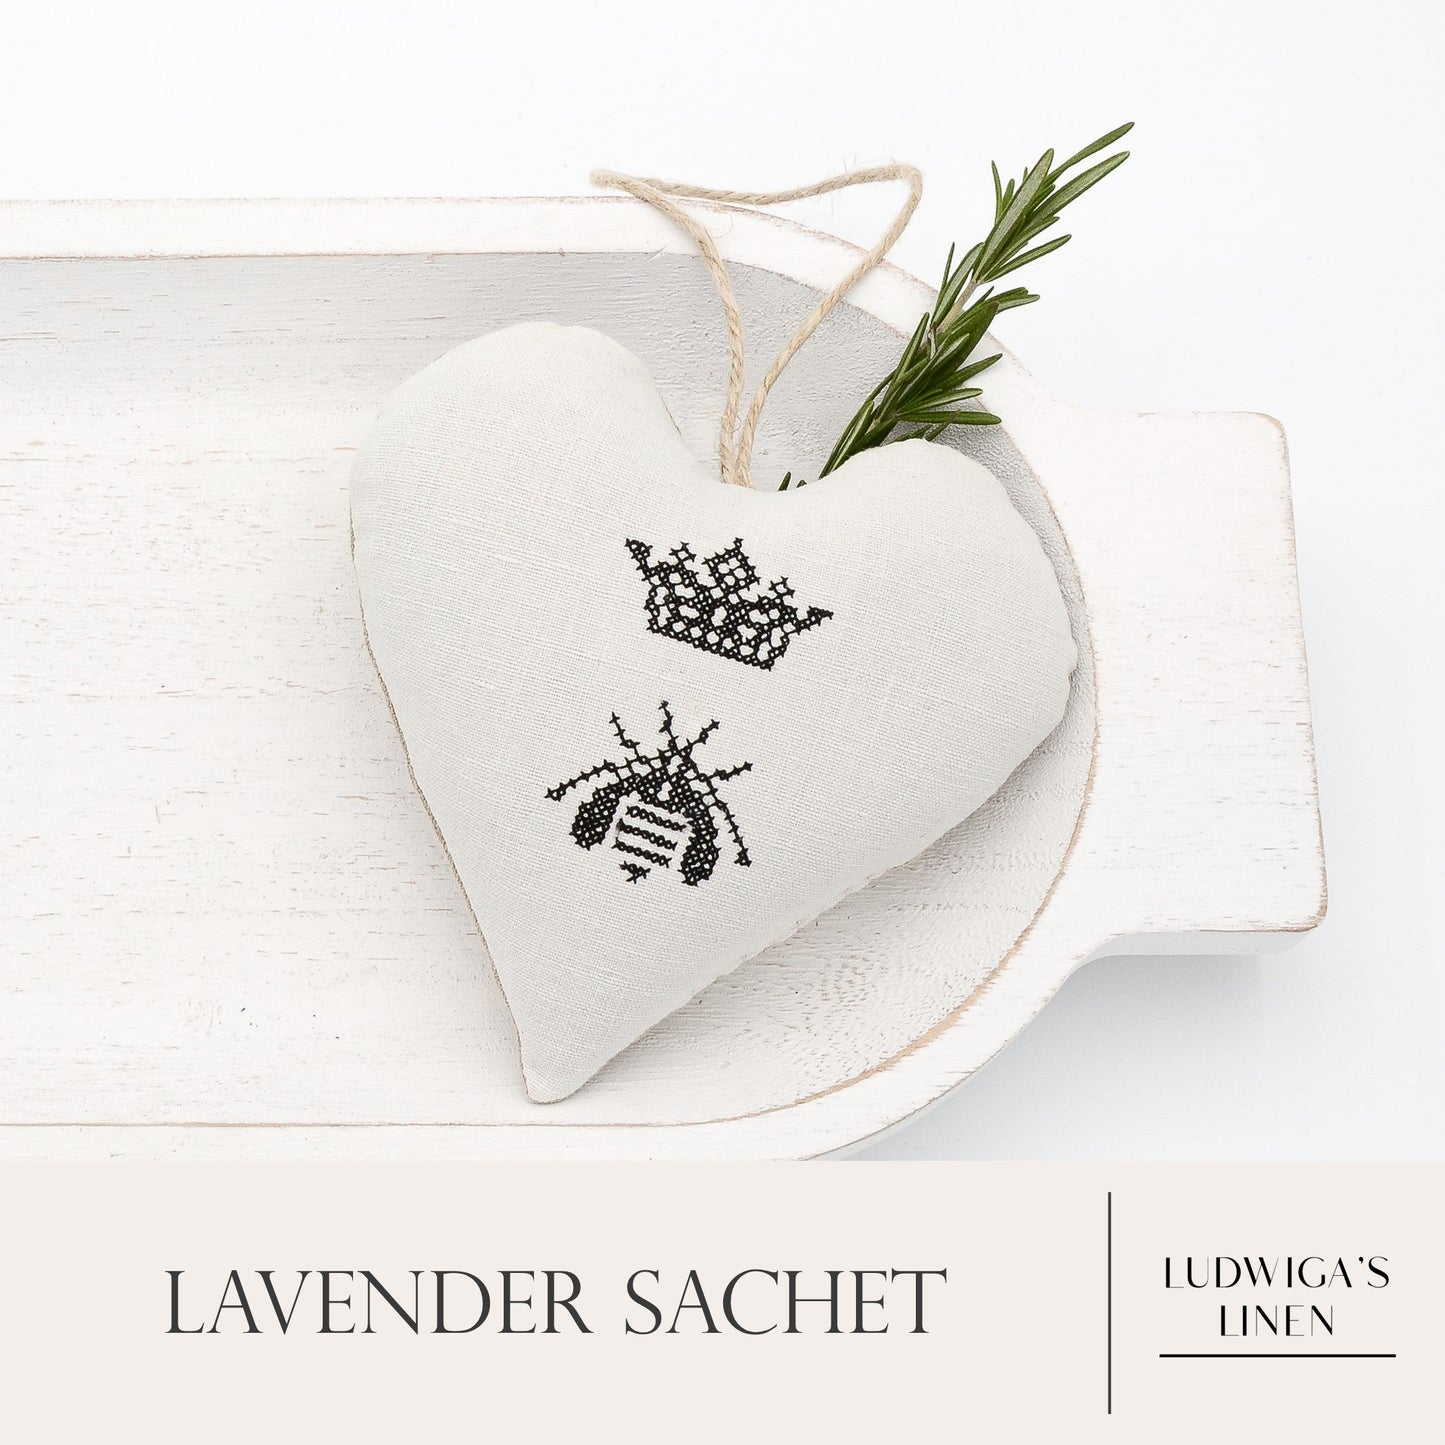 Antique/vintage French/German linen lavender sachet heart, hemp twine tie and filled with high quality lavender from Provence France